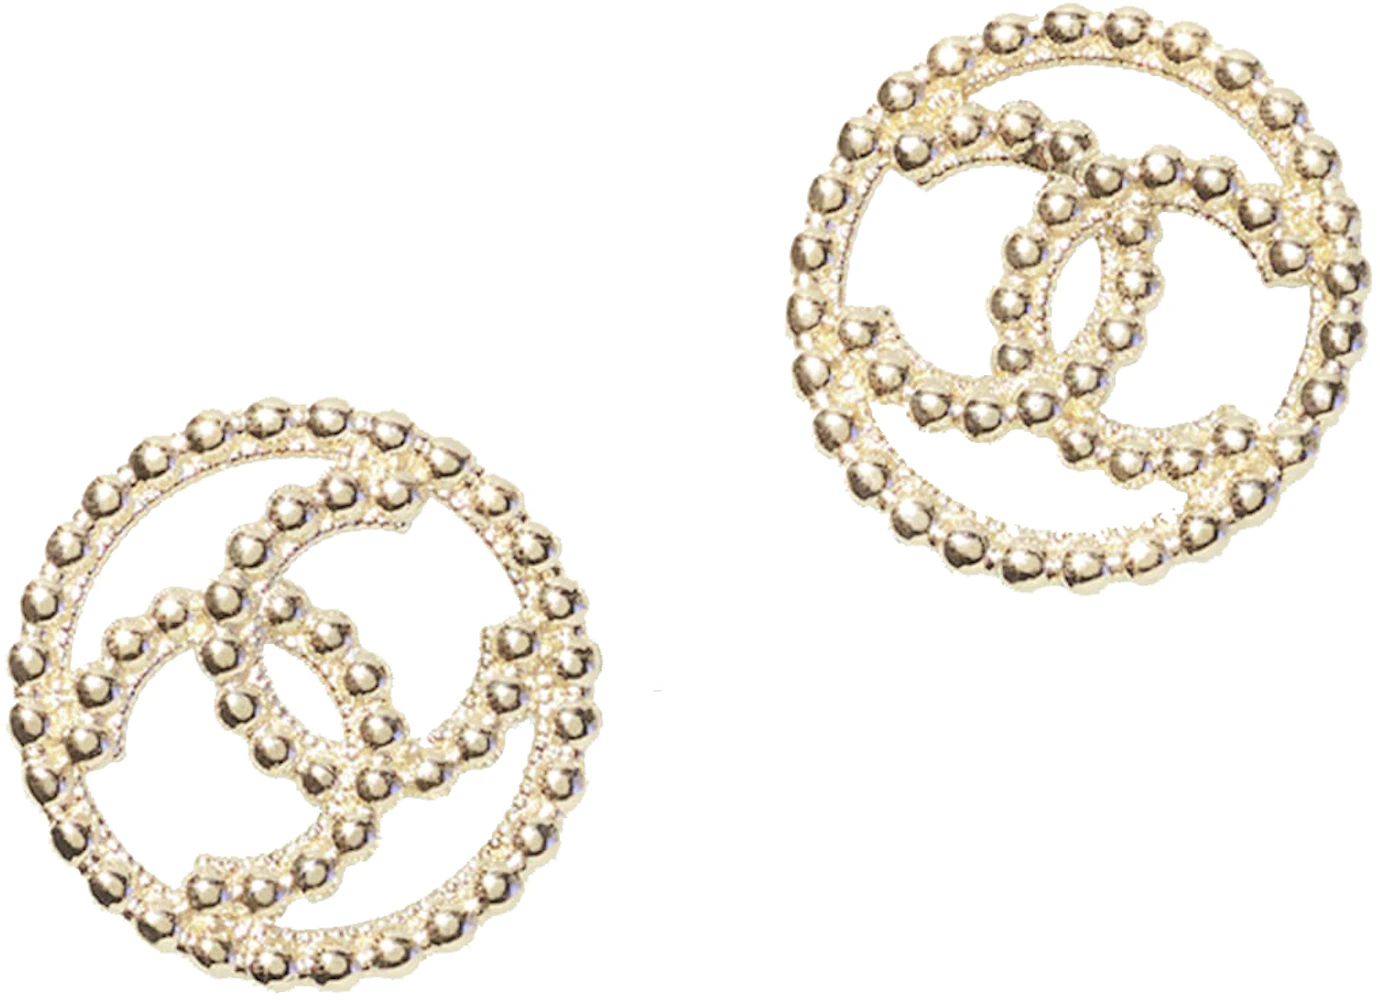 Reserved: Chanel 1996 Petite Logo Earrings with Oxidized Silver